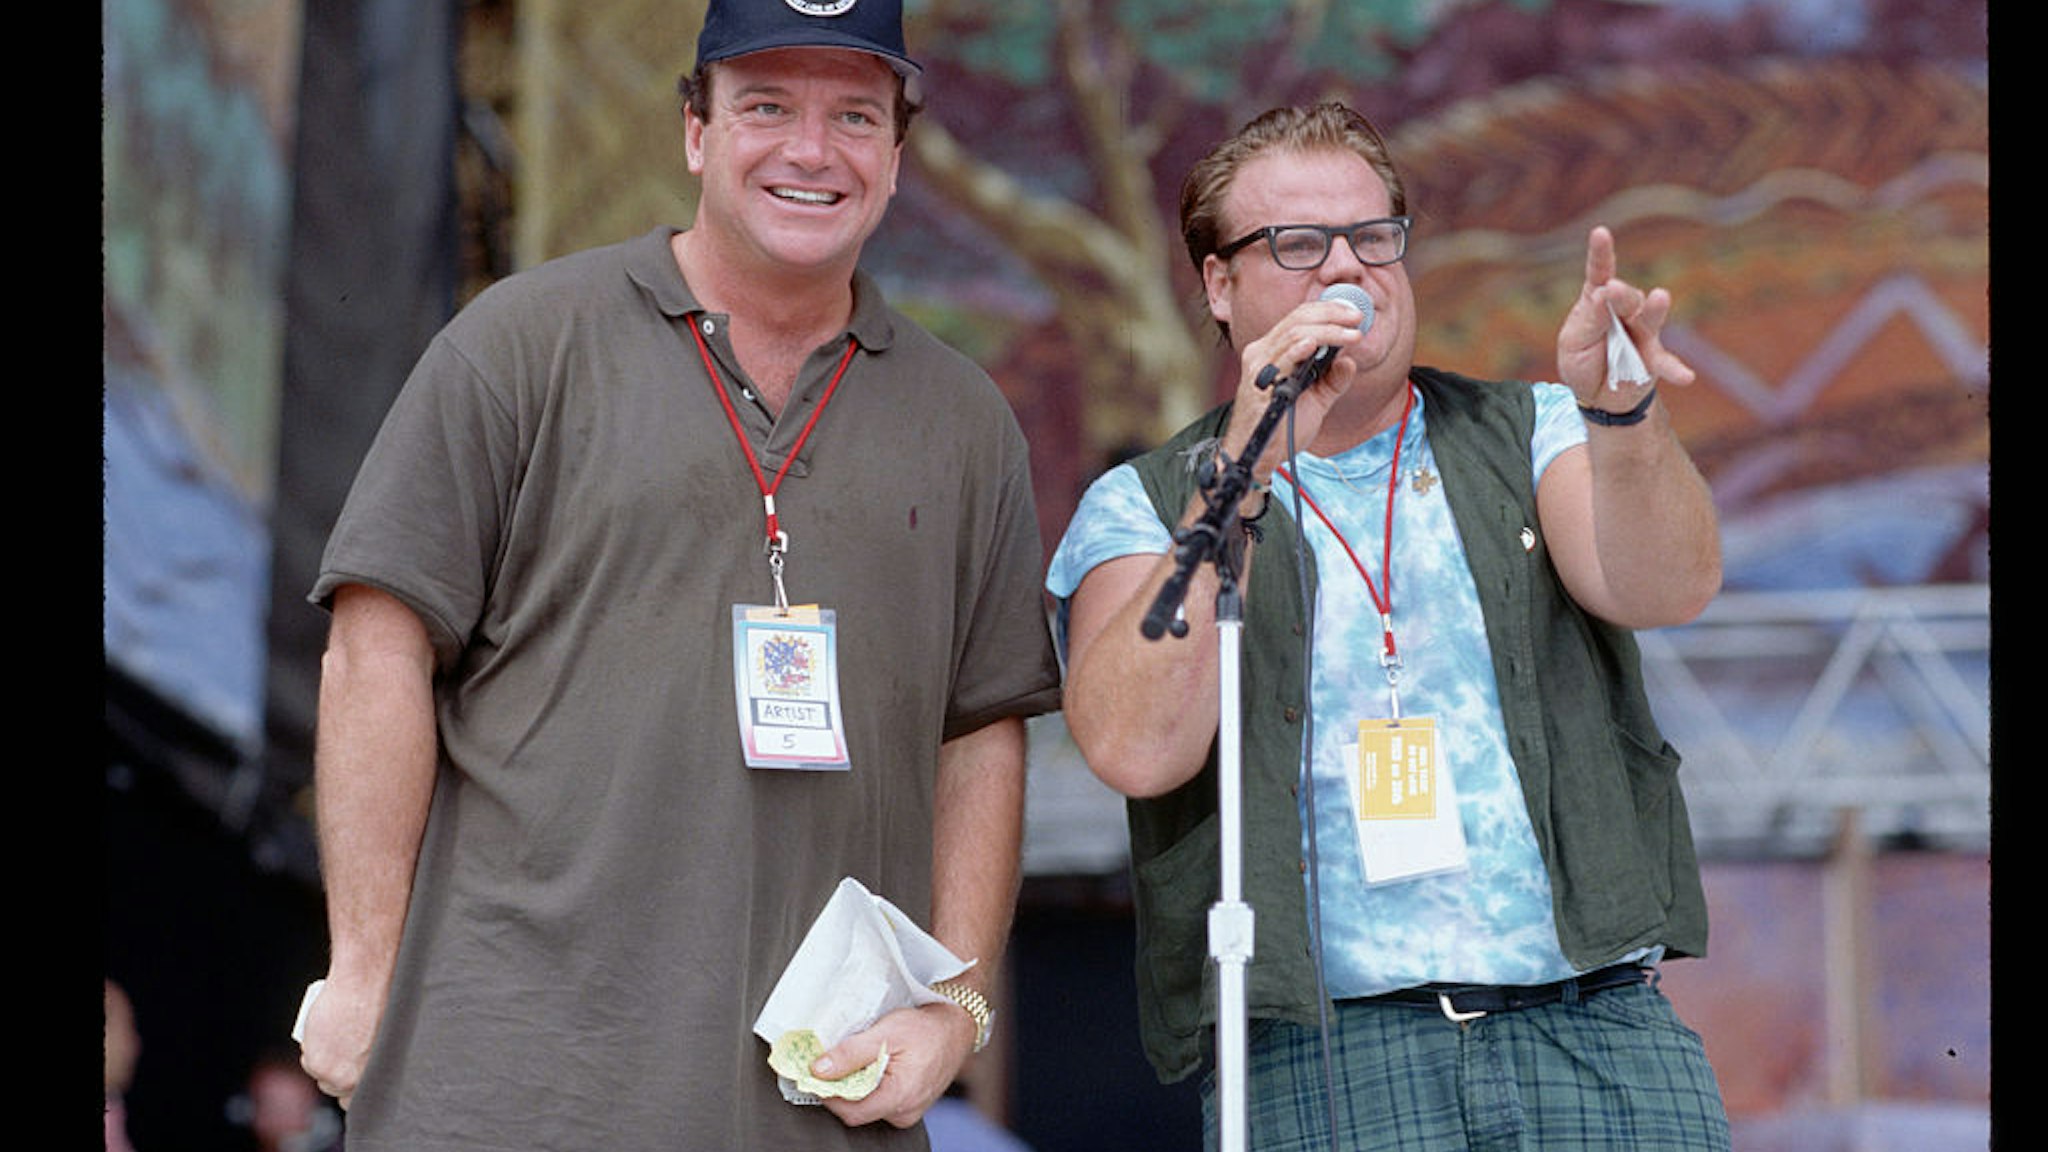 (Original Caption) : 8/1994-Photo shows Chris Farley and Tom Arnold on the stage at the 25th Anniversary concert for the celebration of the original Woodstock concert, which took place in August, 1969. (Photo by Lynn Goldsmith/Corbis/VCG via Getty Images)